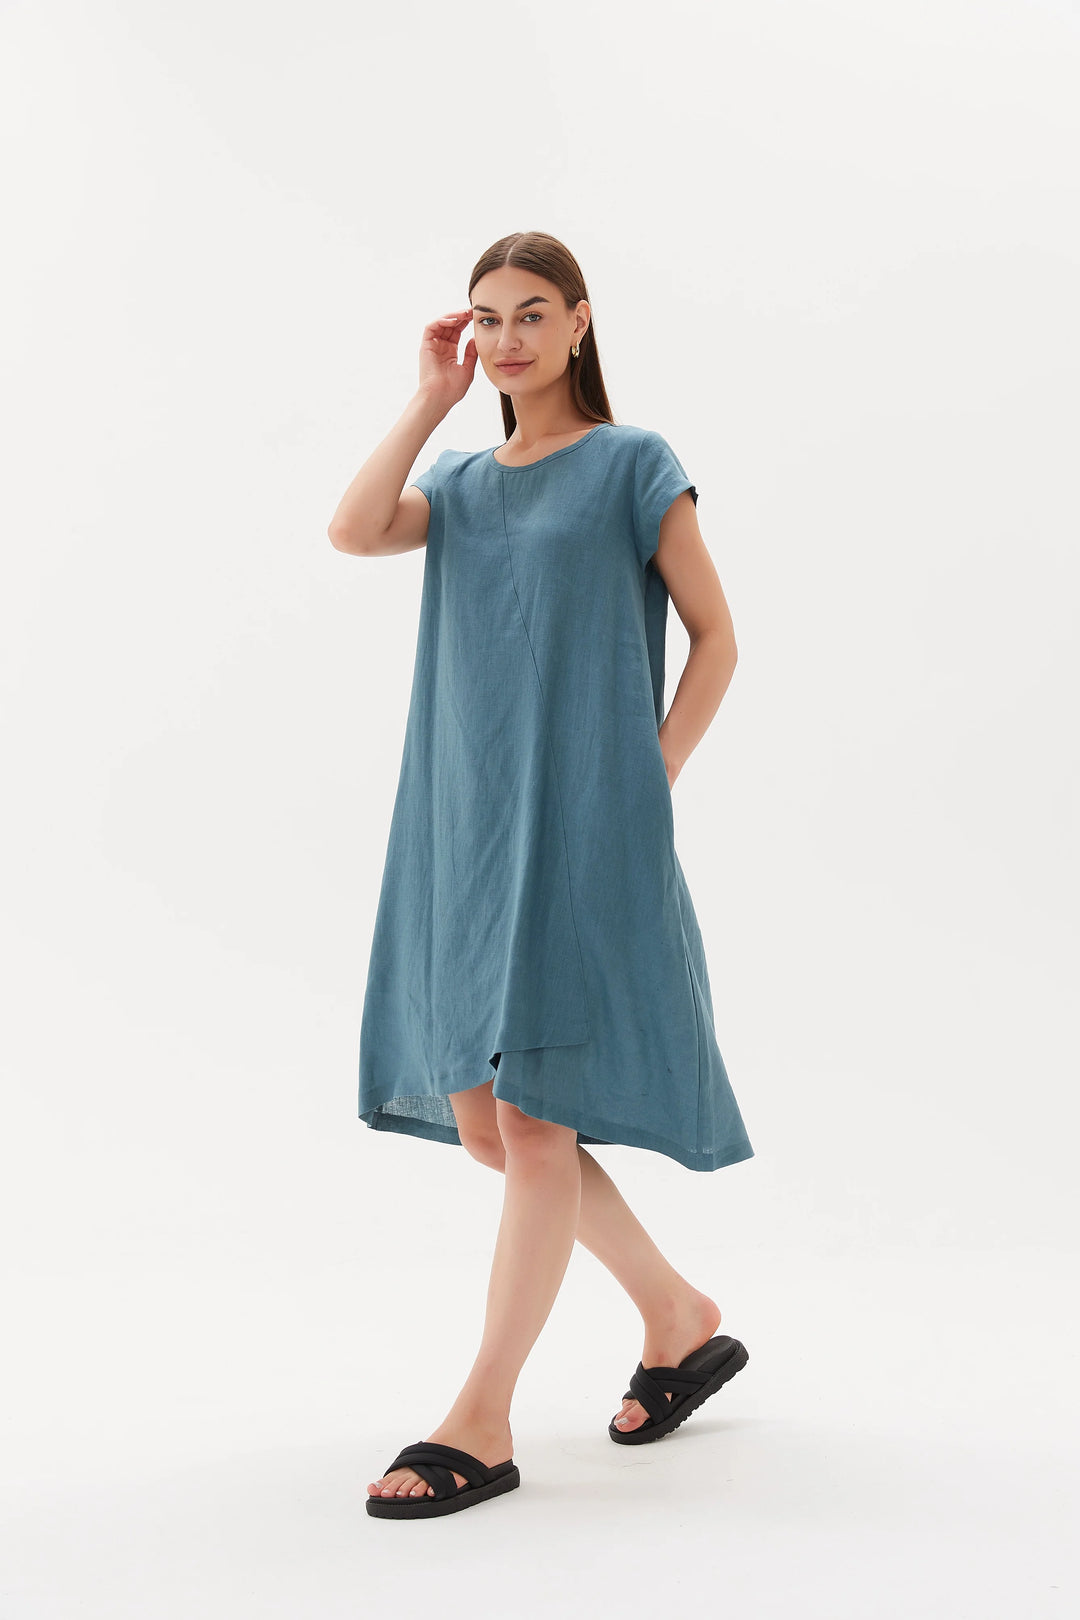 Cap Sleeve Cross Over Dress - Washed Blue